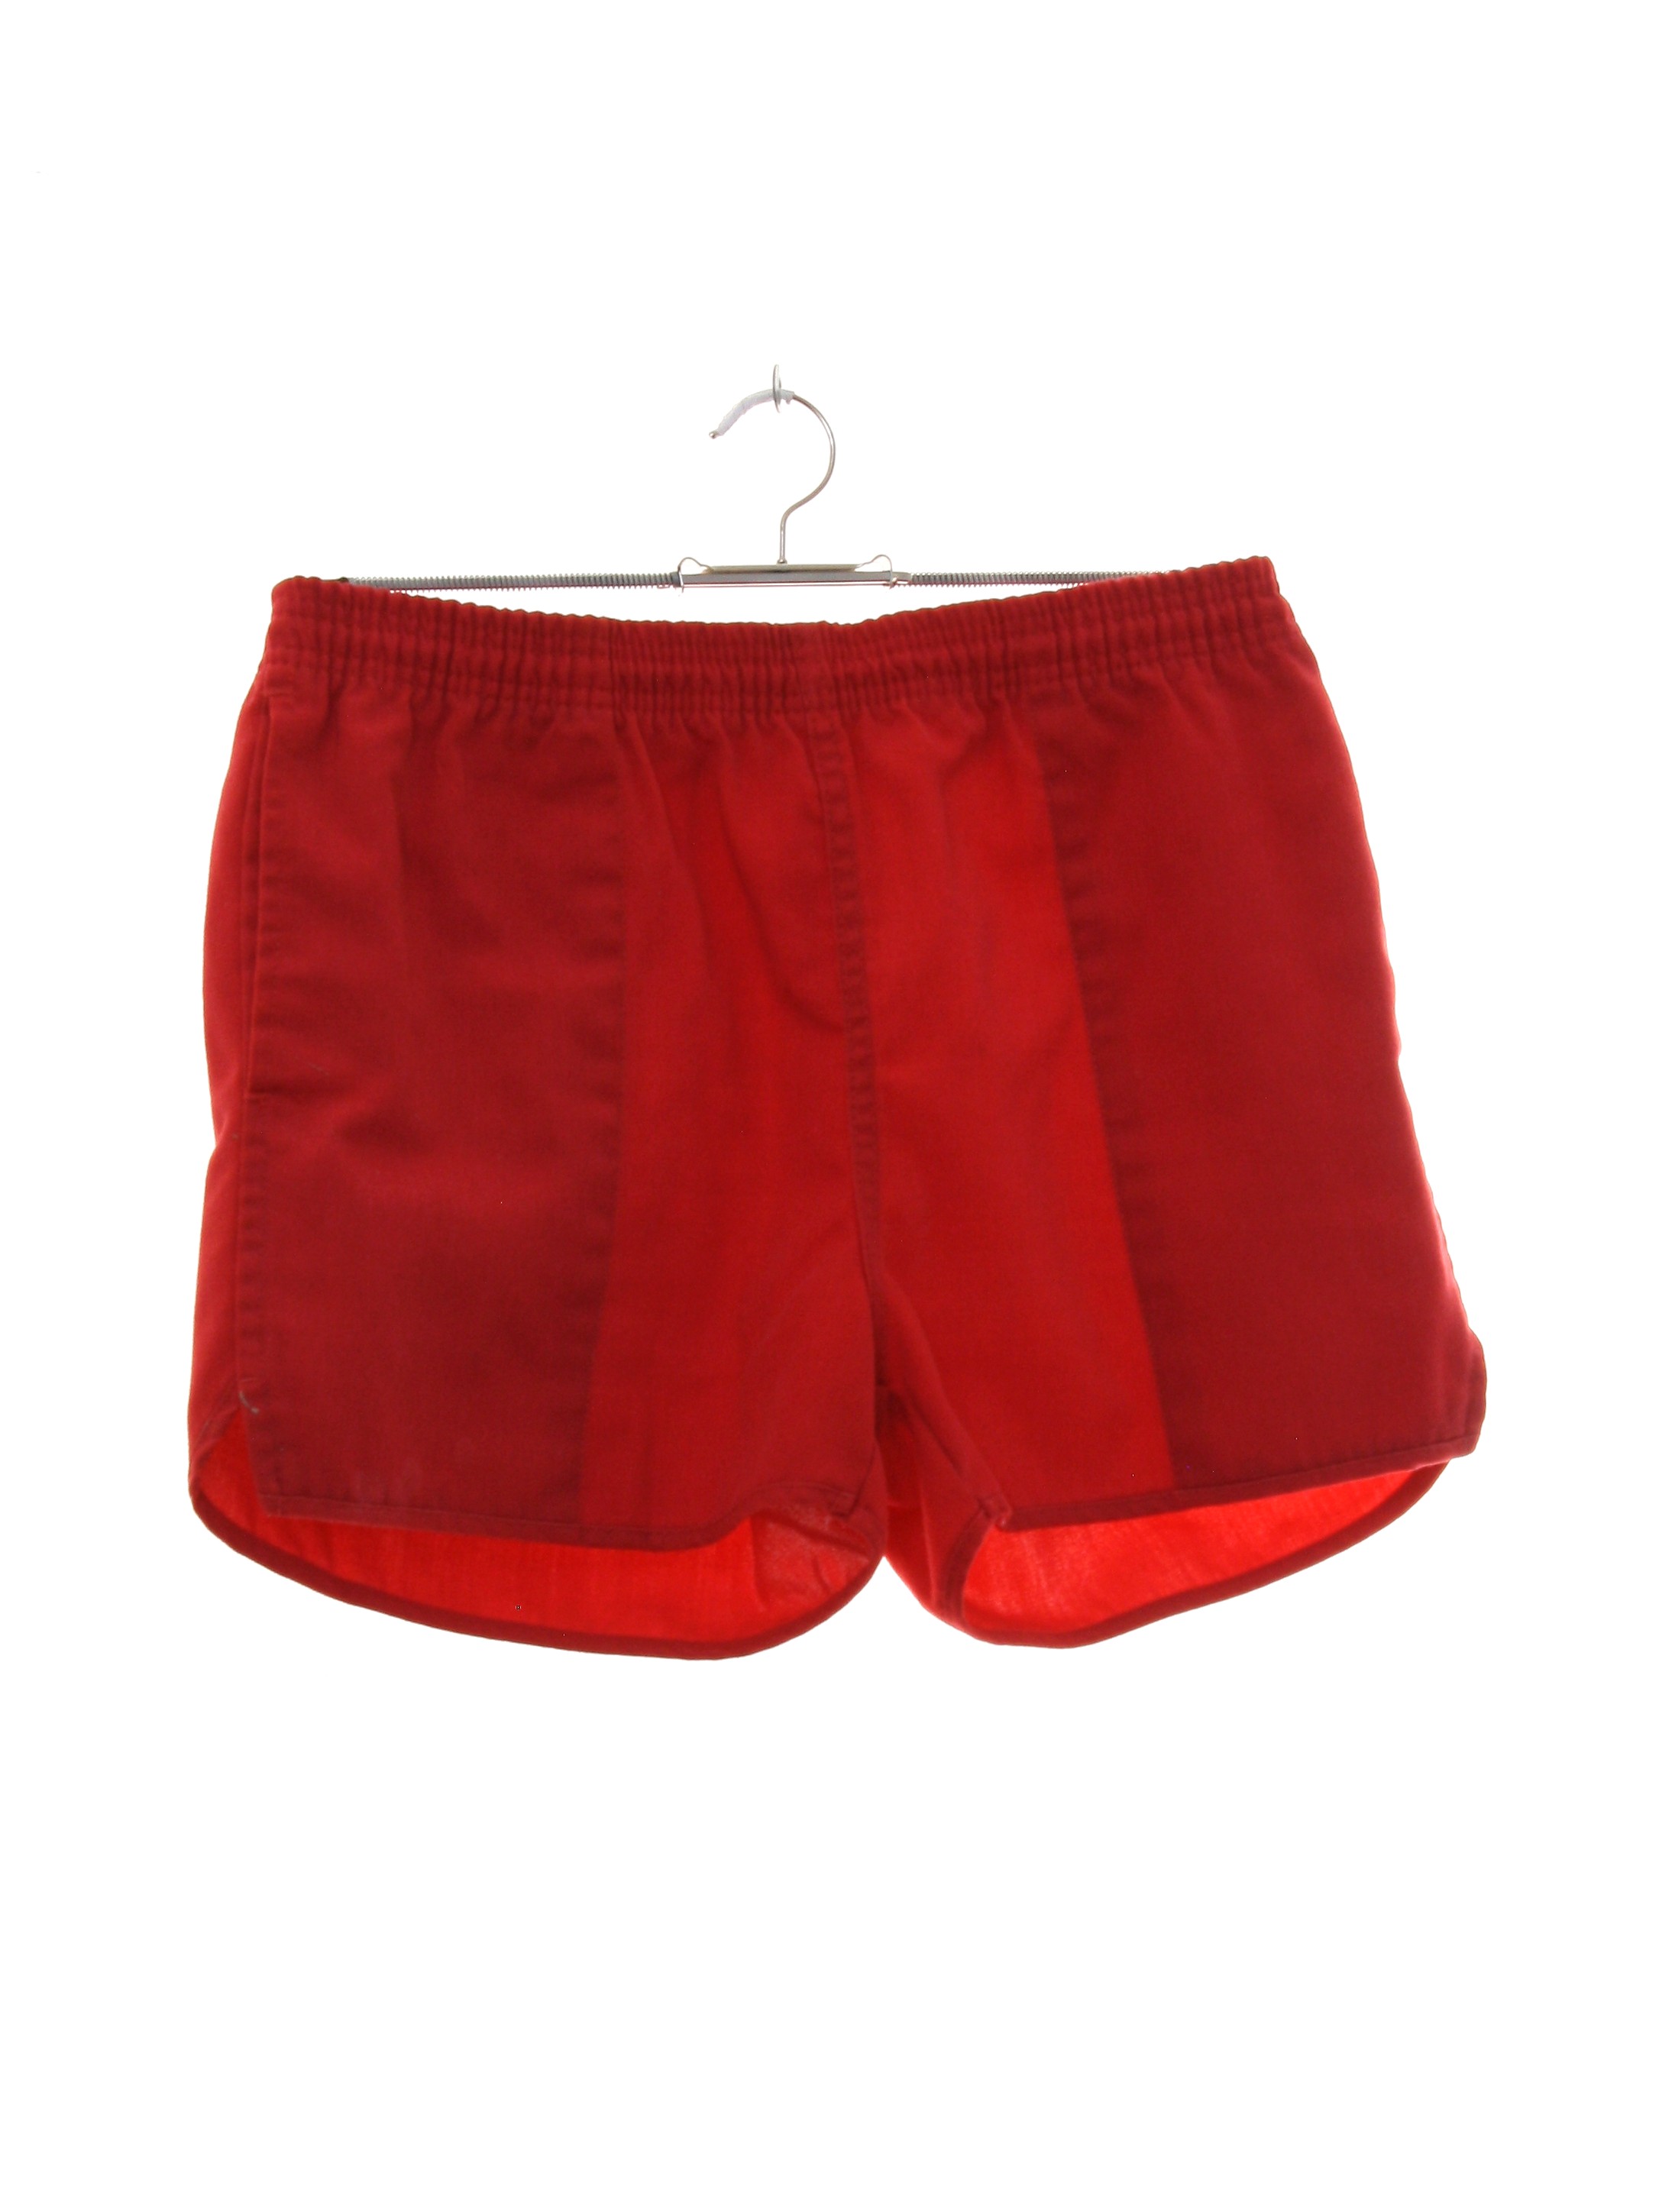 Download Towncraft 1980s Vintage Shorts: 80s -Towncraft- Mens red ...